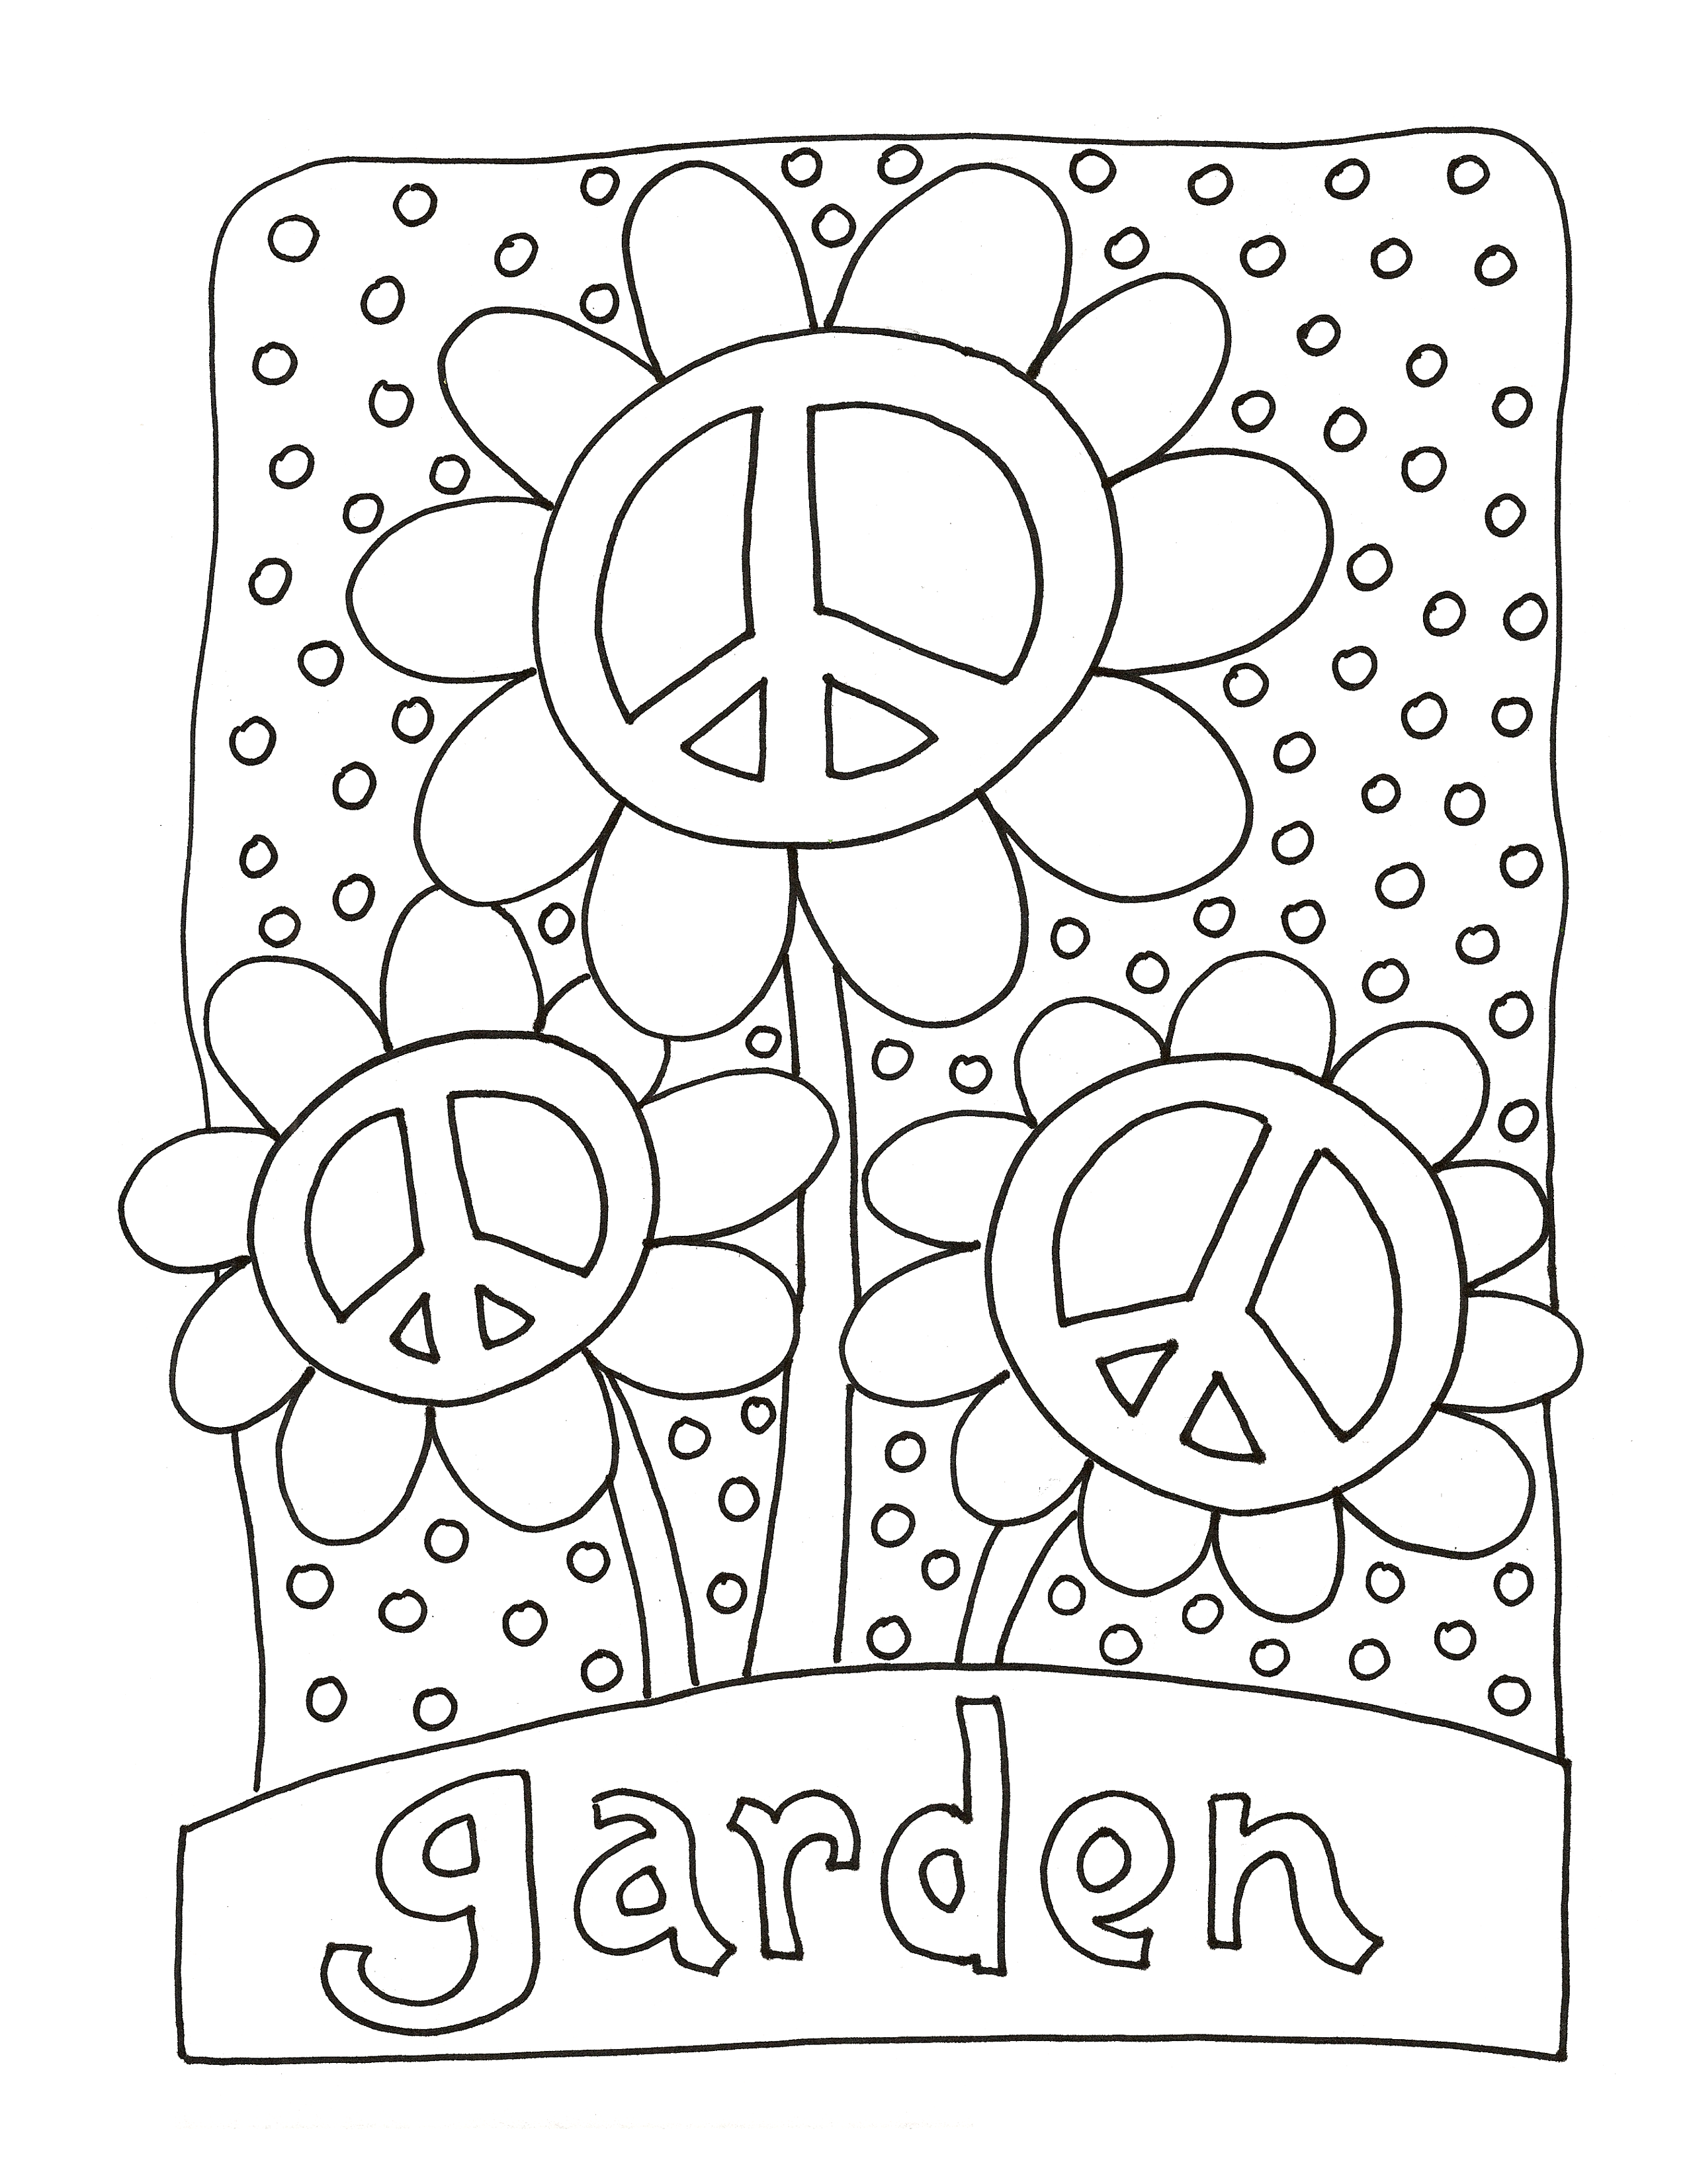 Download Coloring Pages Art - Coloring Home